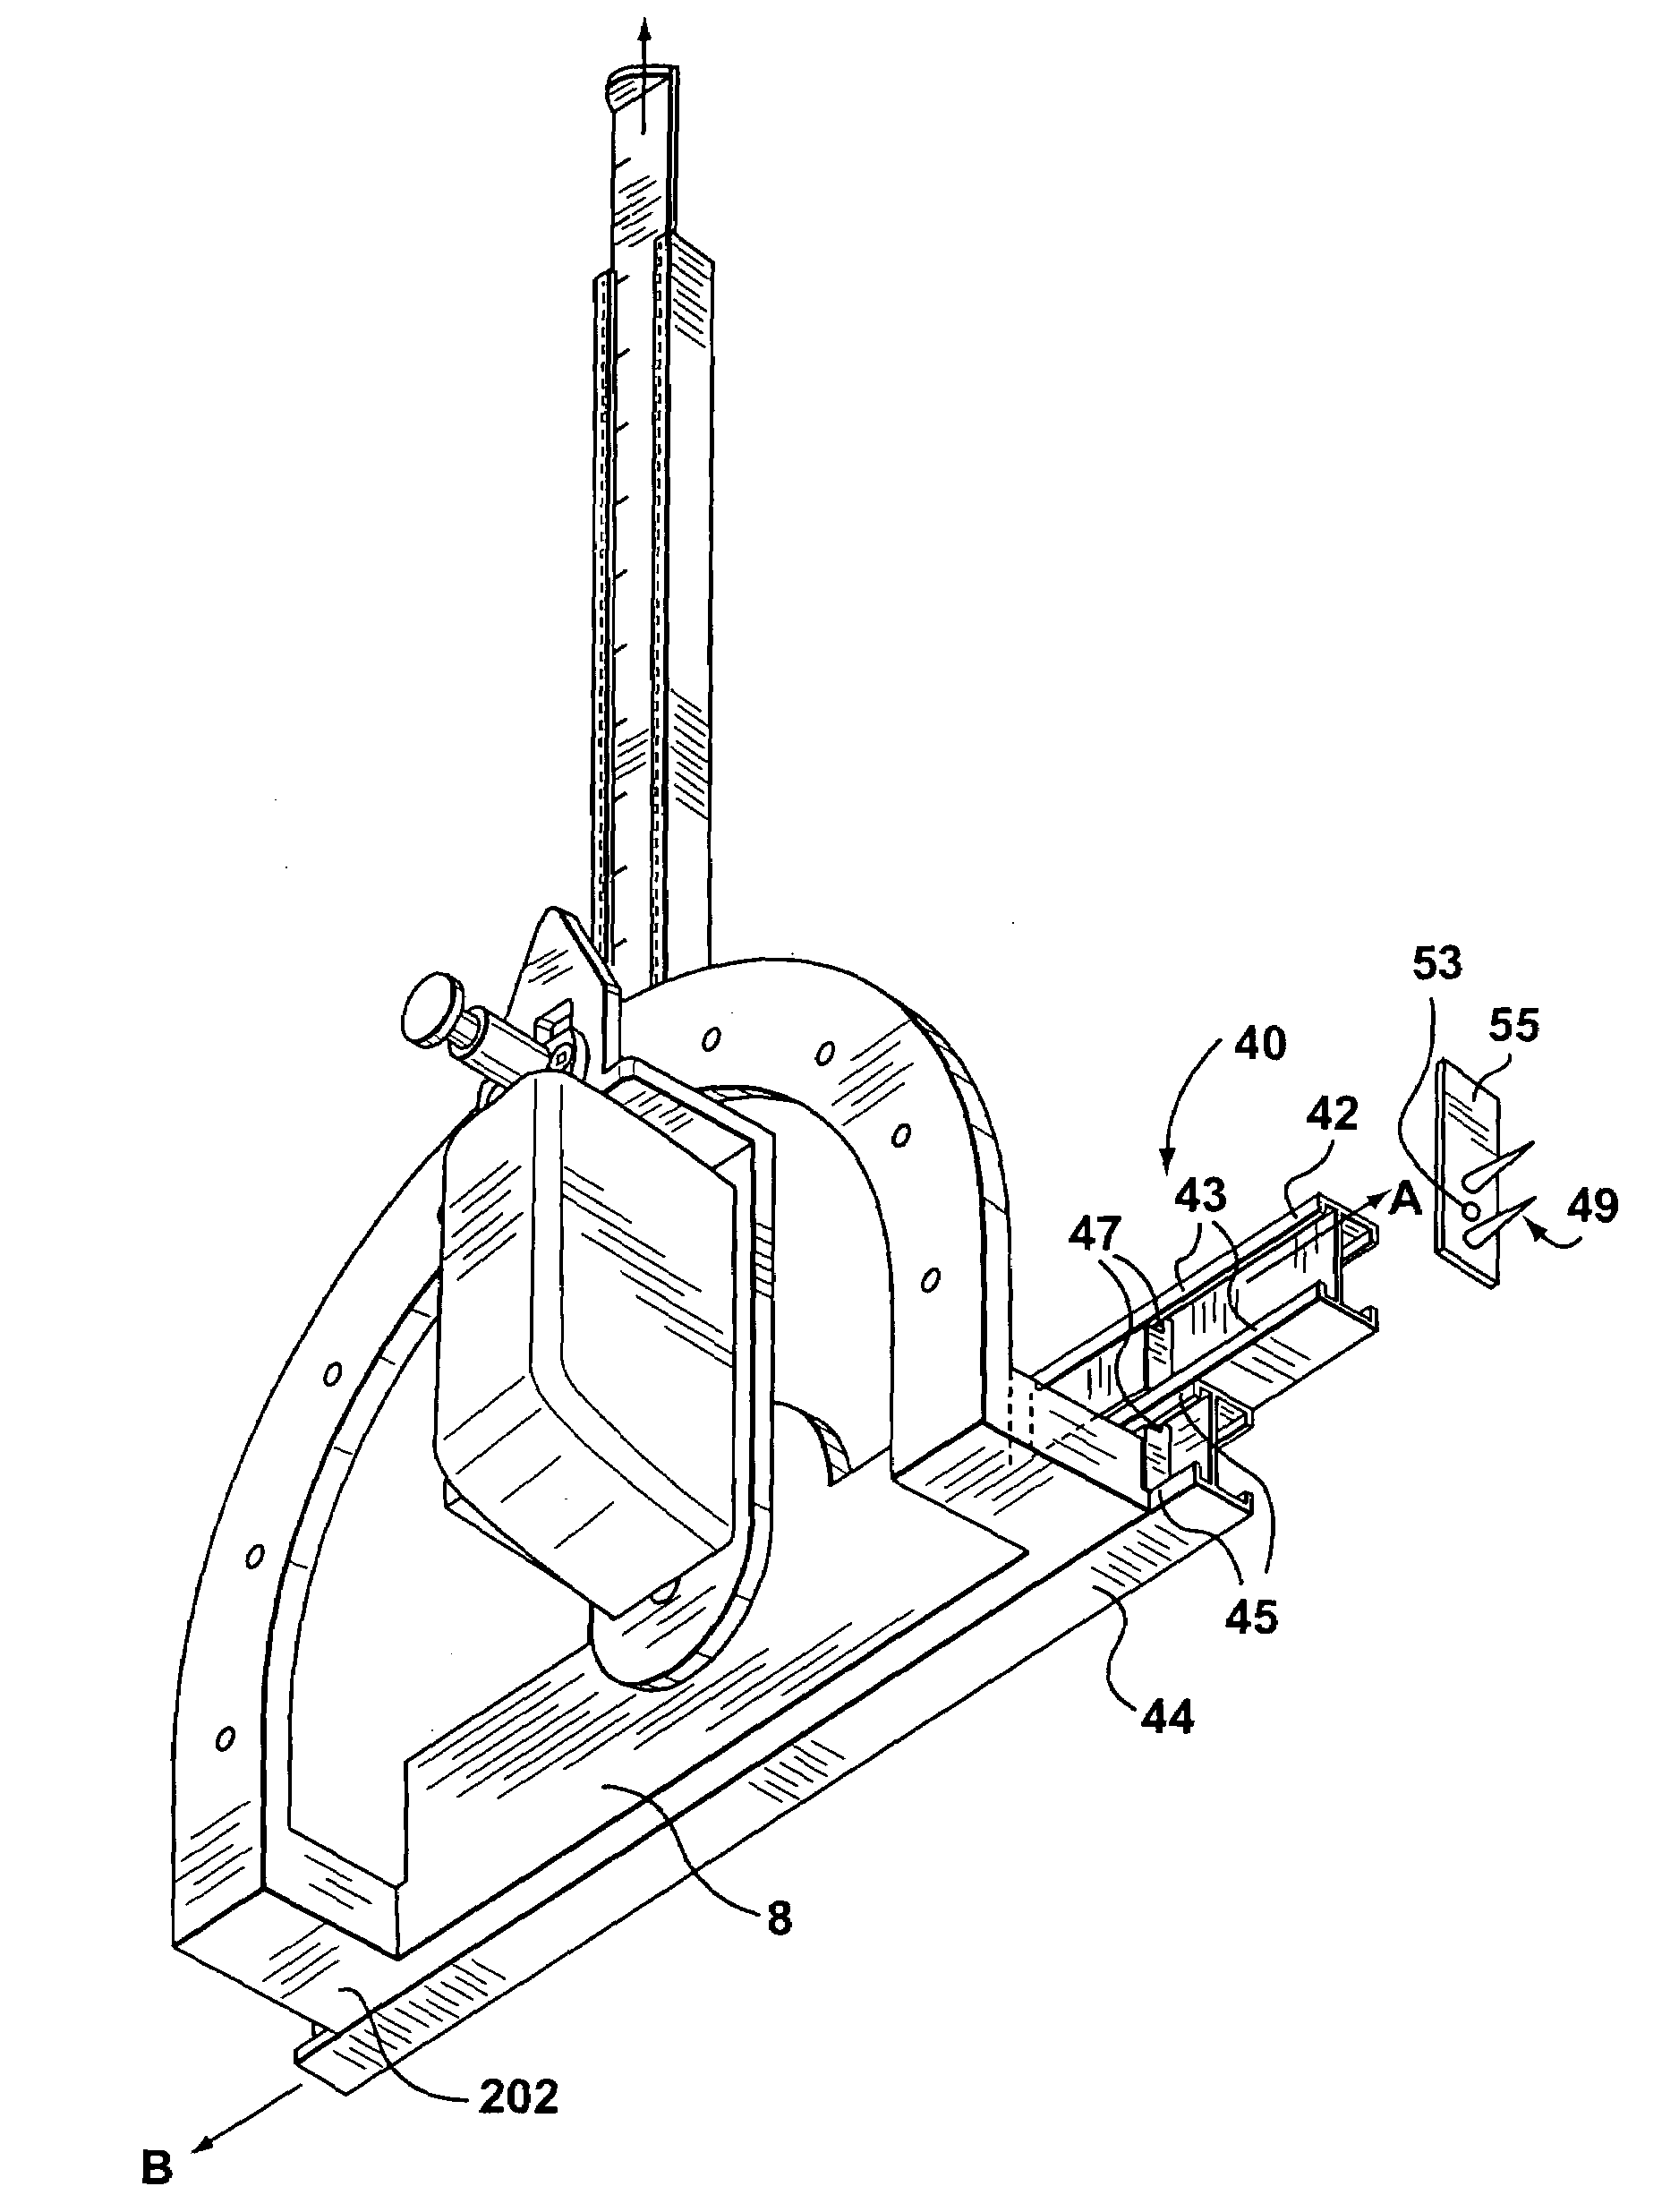 Arch measuring device